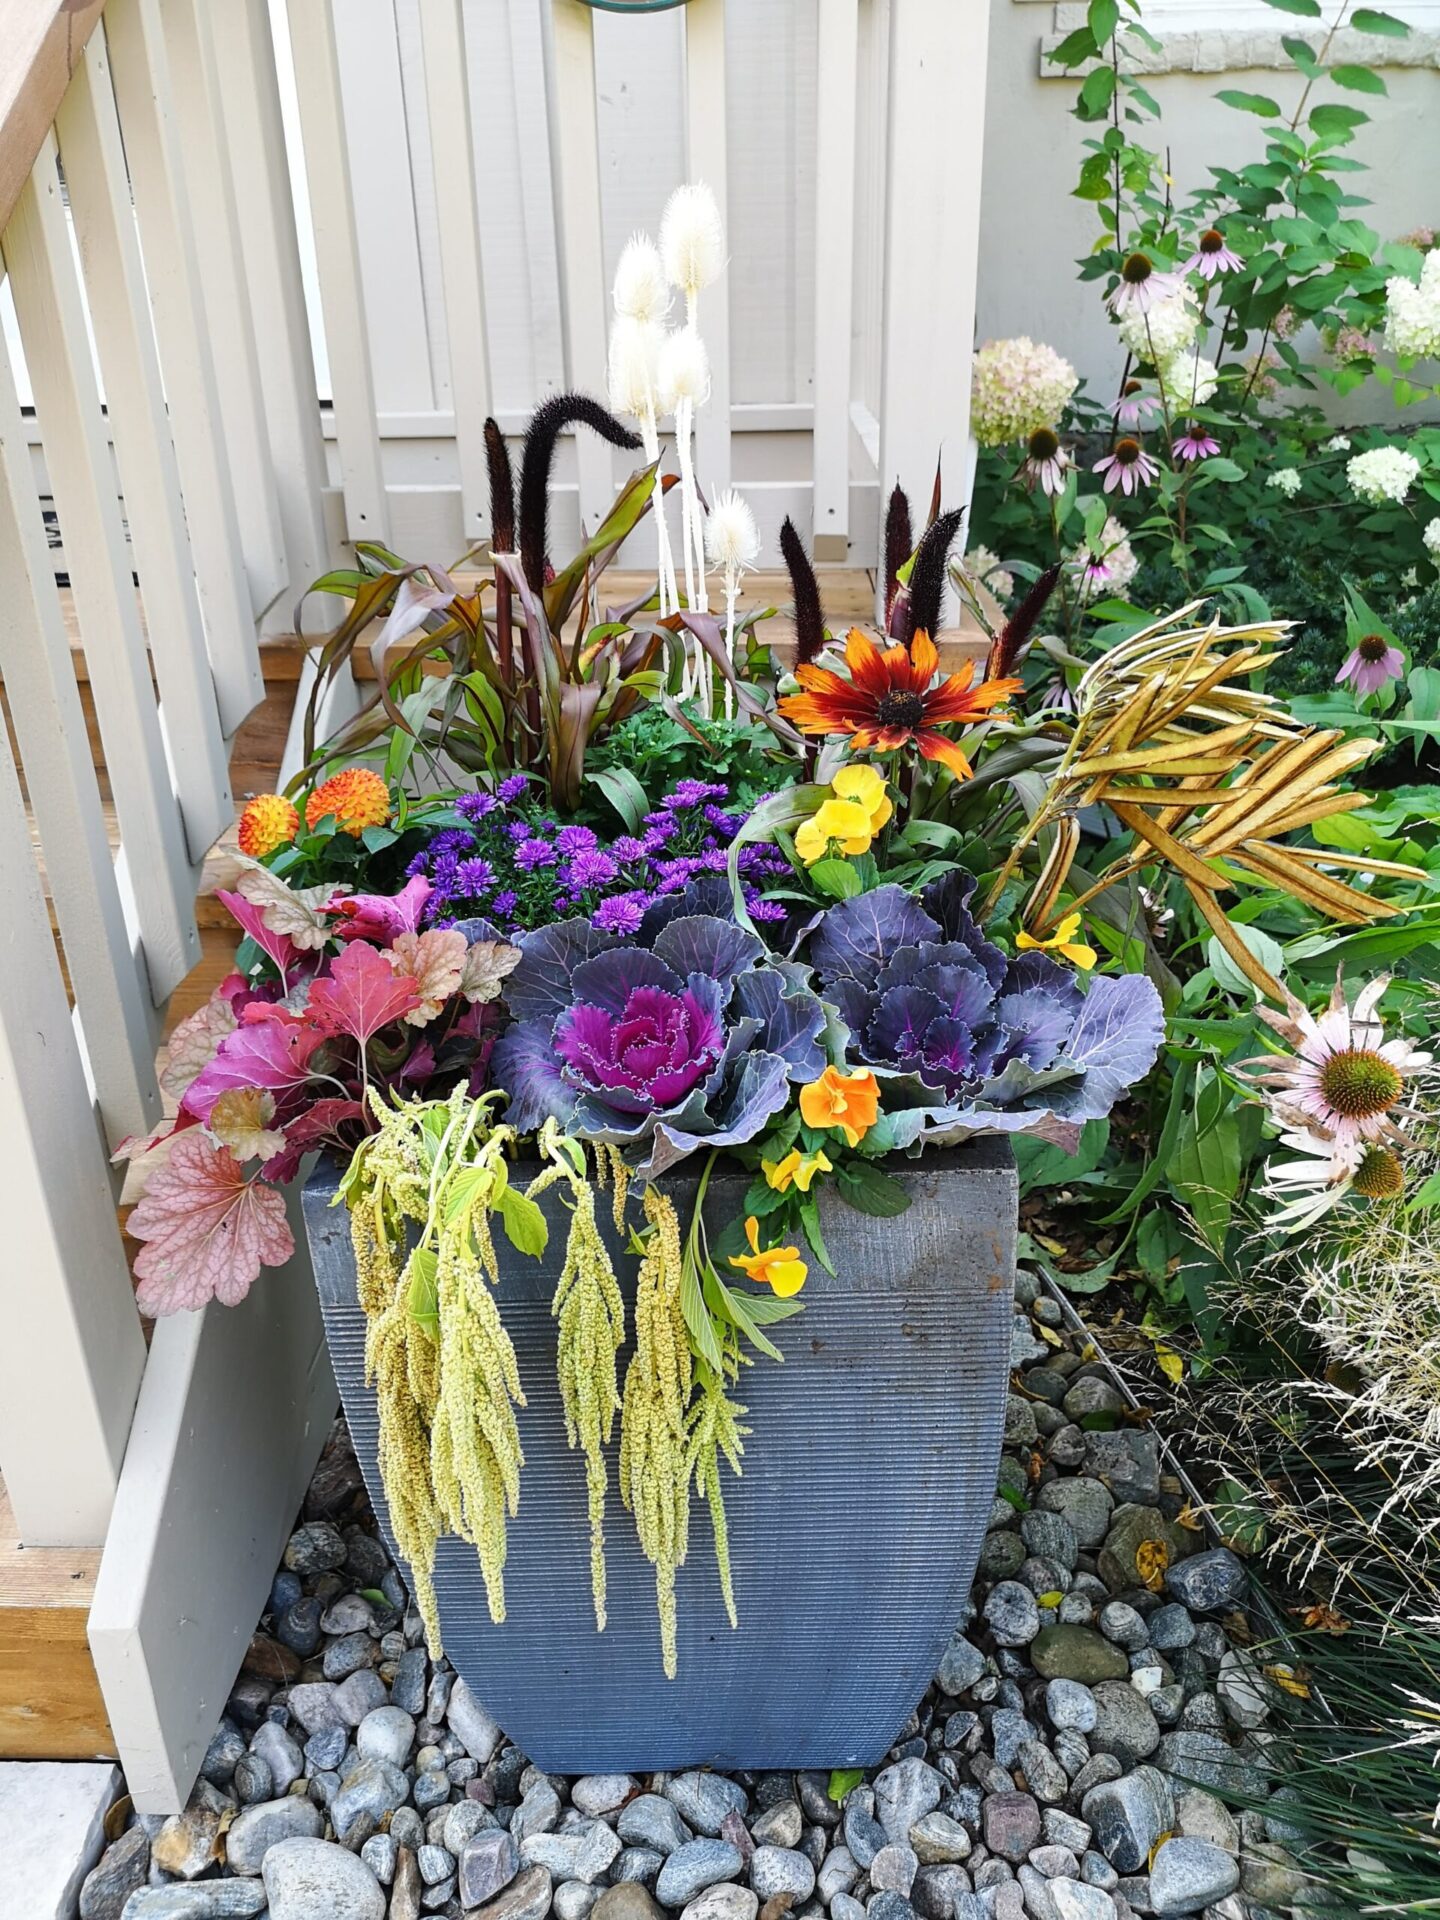 This image shows a vibrant arrangement of various flowers and plants in a large blue-gray pot, set against a pebble-covered ground and a wooden railing.